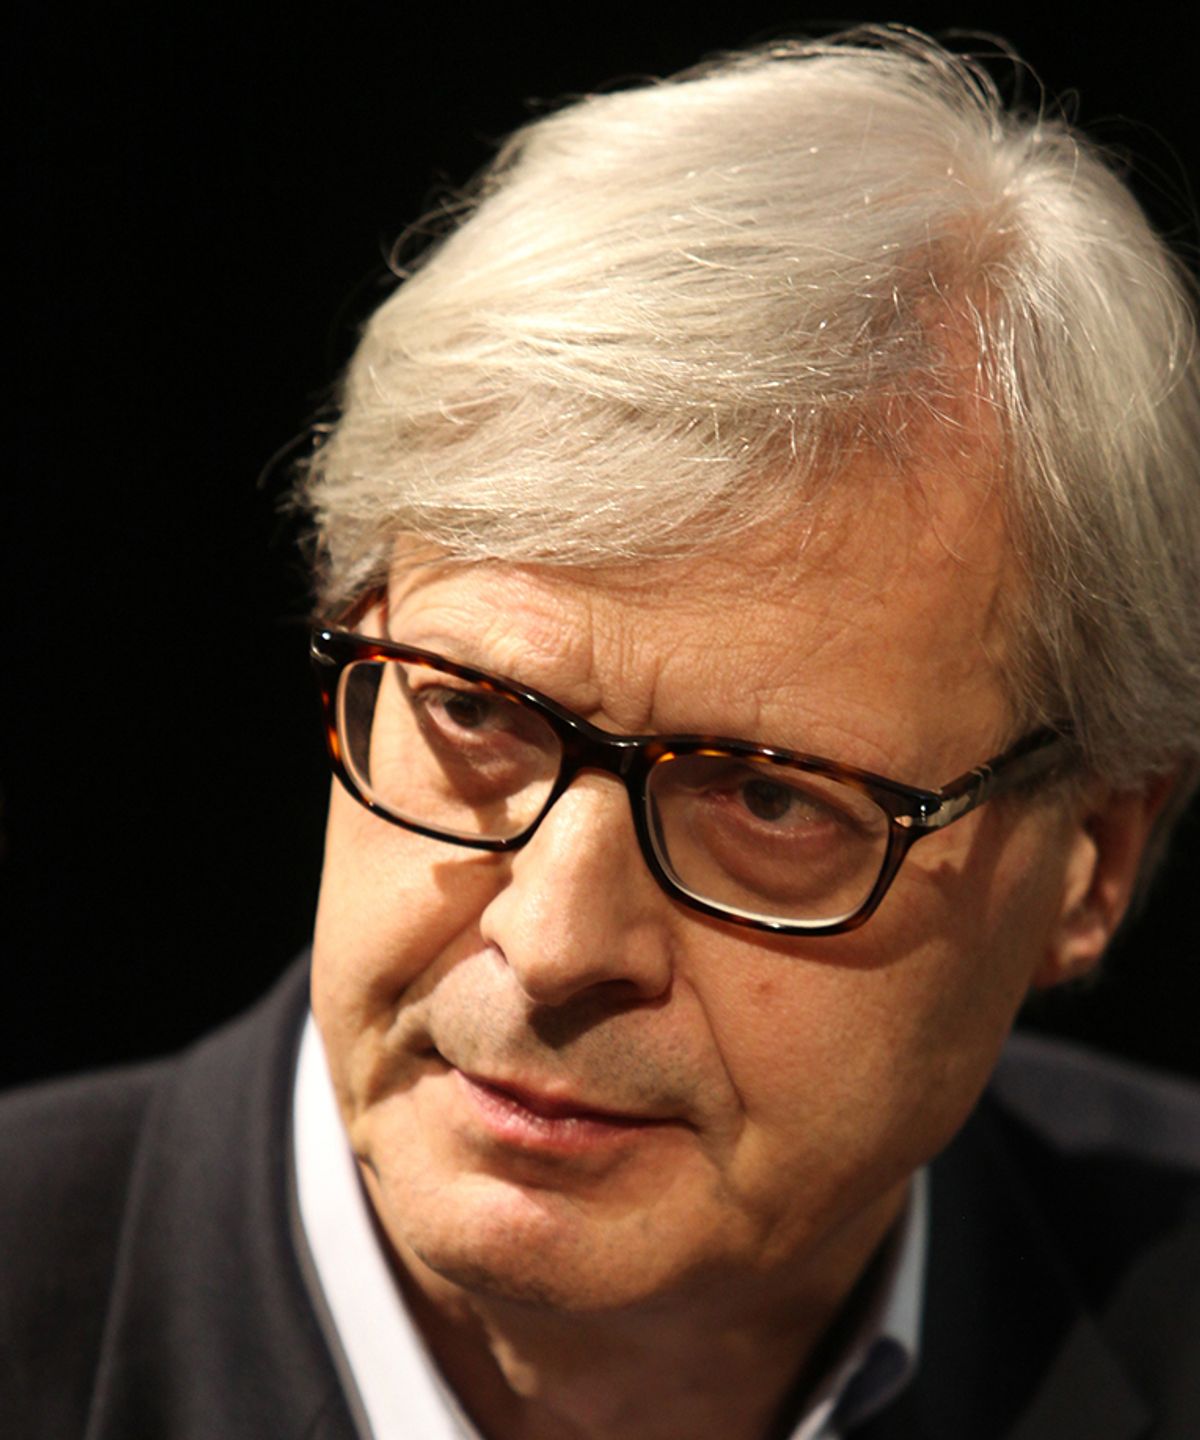 Vittorio Sgarbi, undersecretary to Italy’s culture ministry, said recently that the government intends to adopt the EU directive and reduce VAT from 10% to 5.5% Photo: Bruno Cordioli